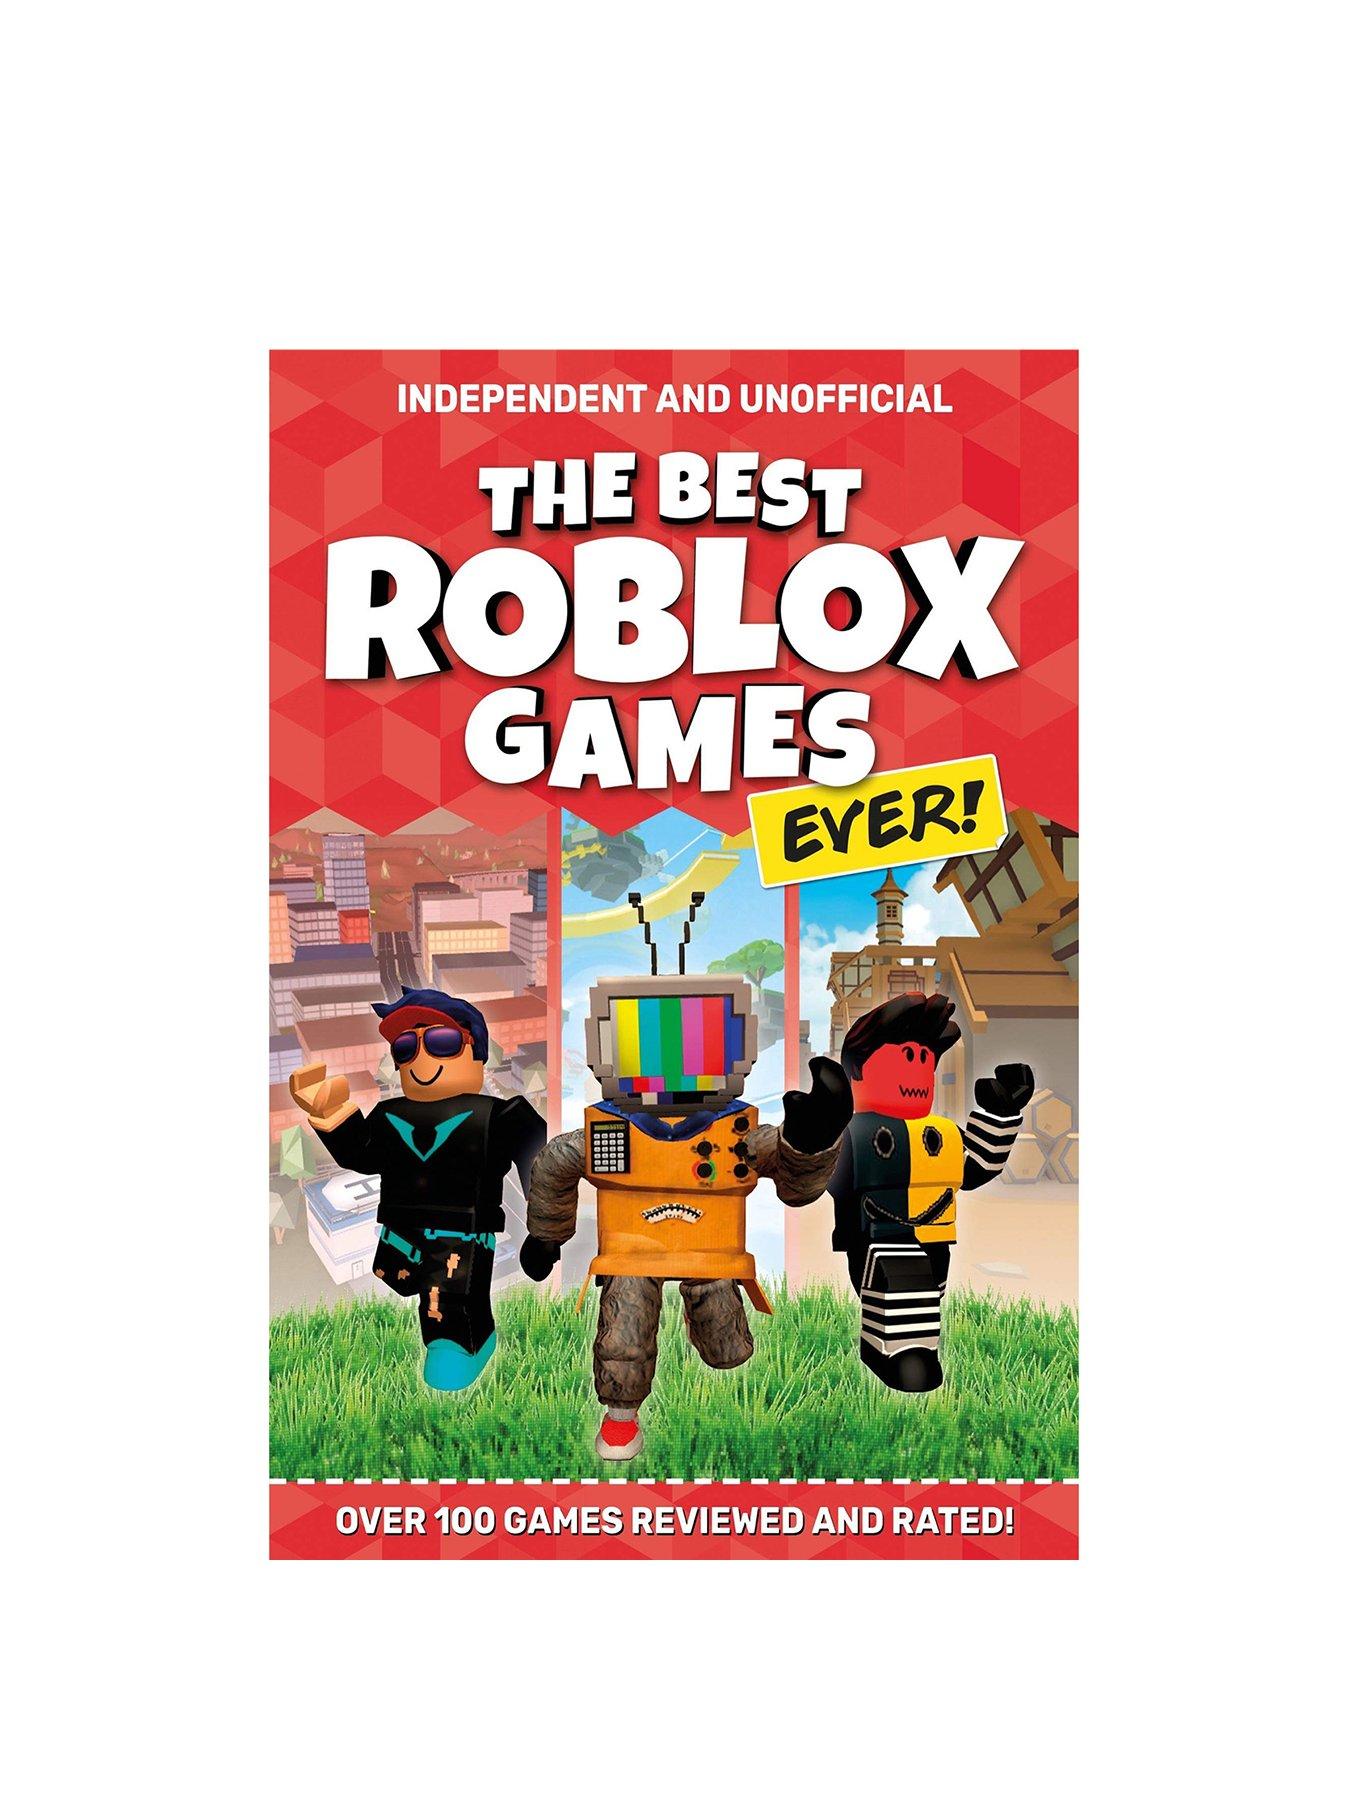 The Best Games on Roblox